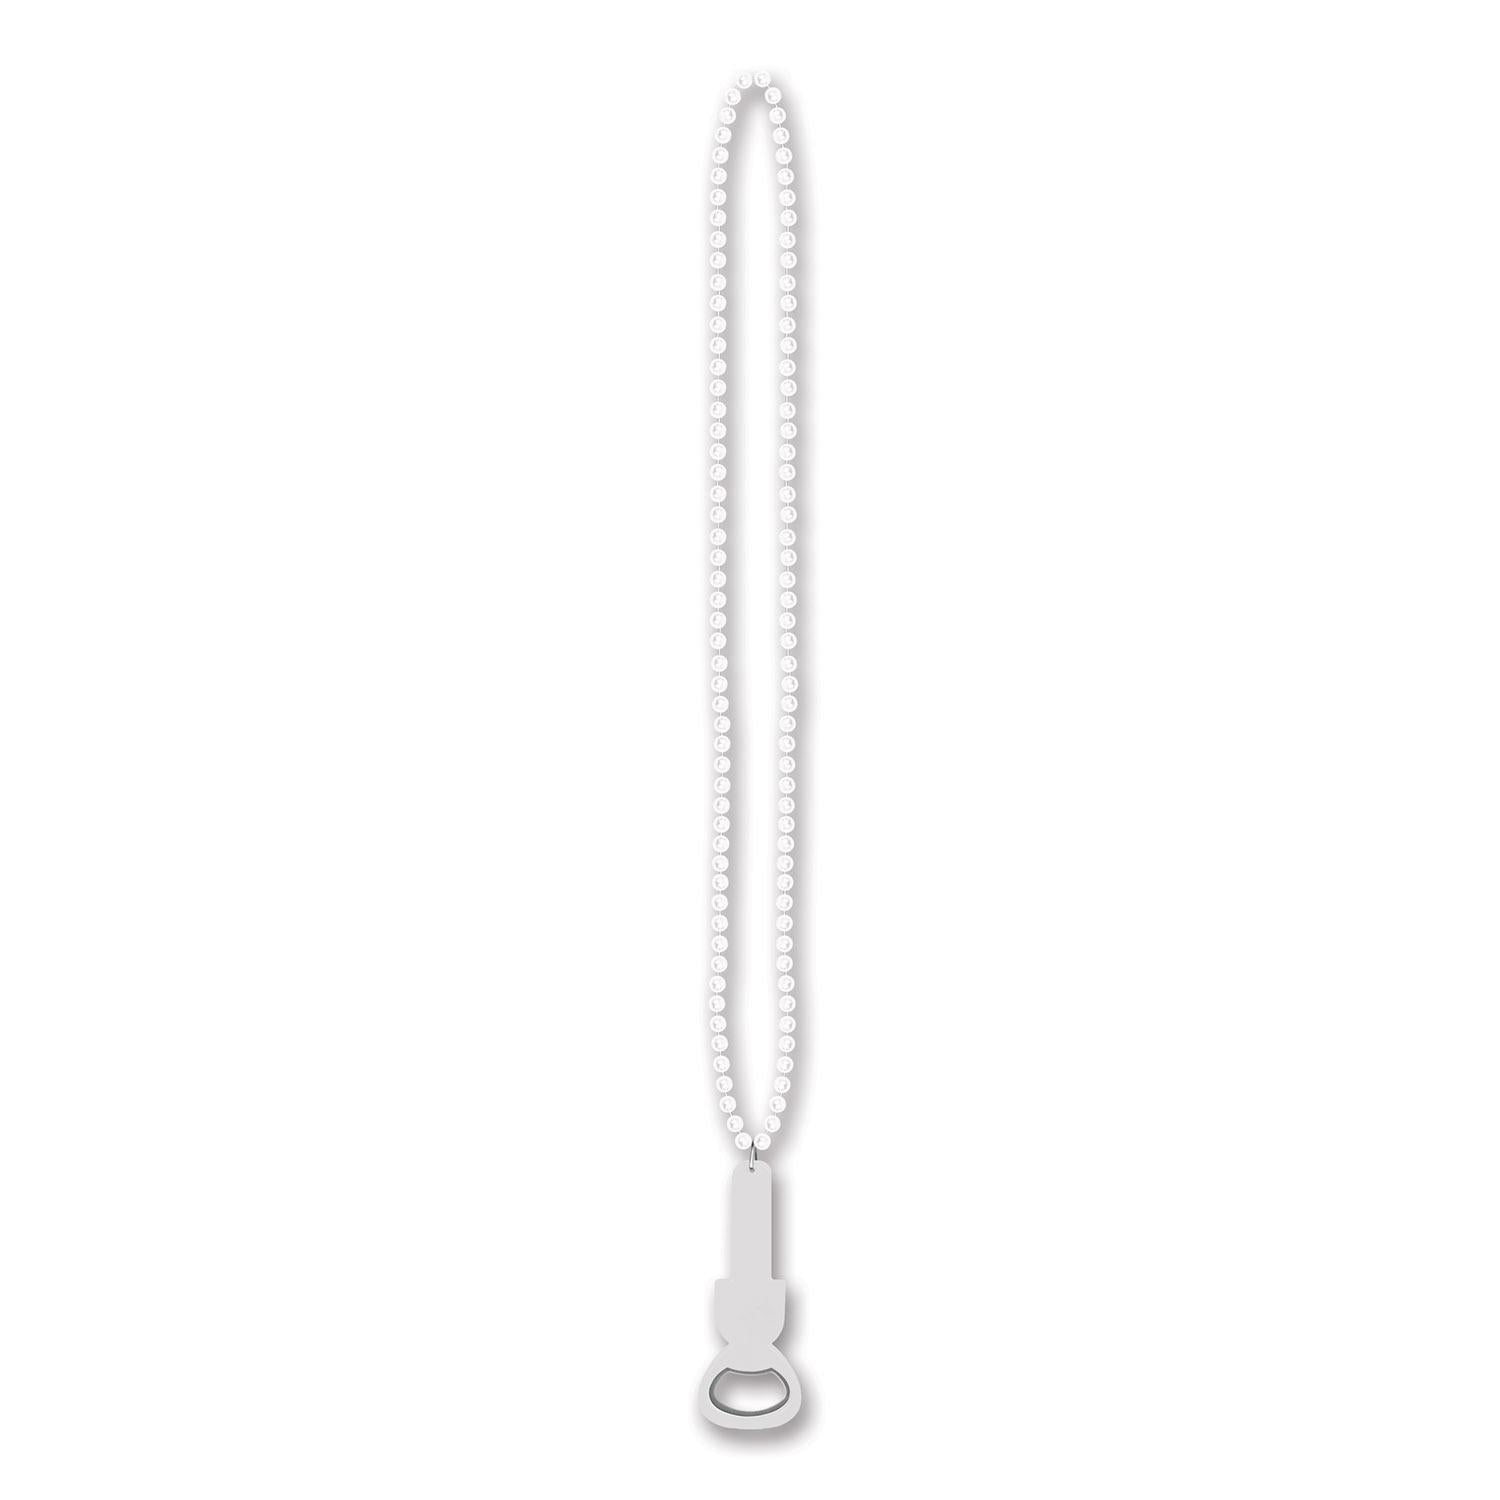 Beistle Bead Necklaces with Bottle Opener - white